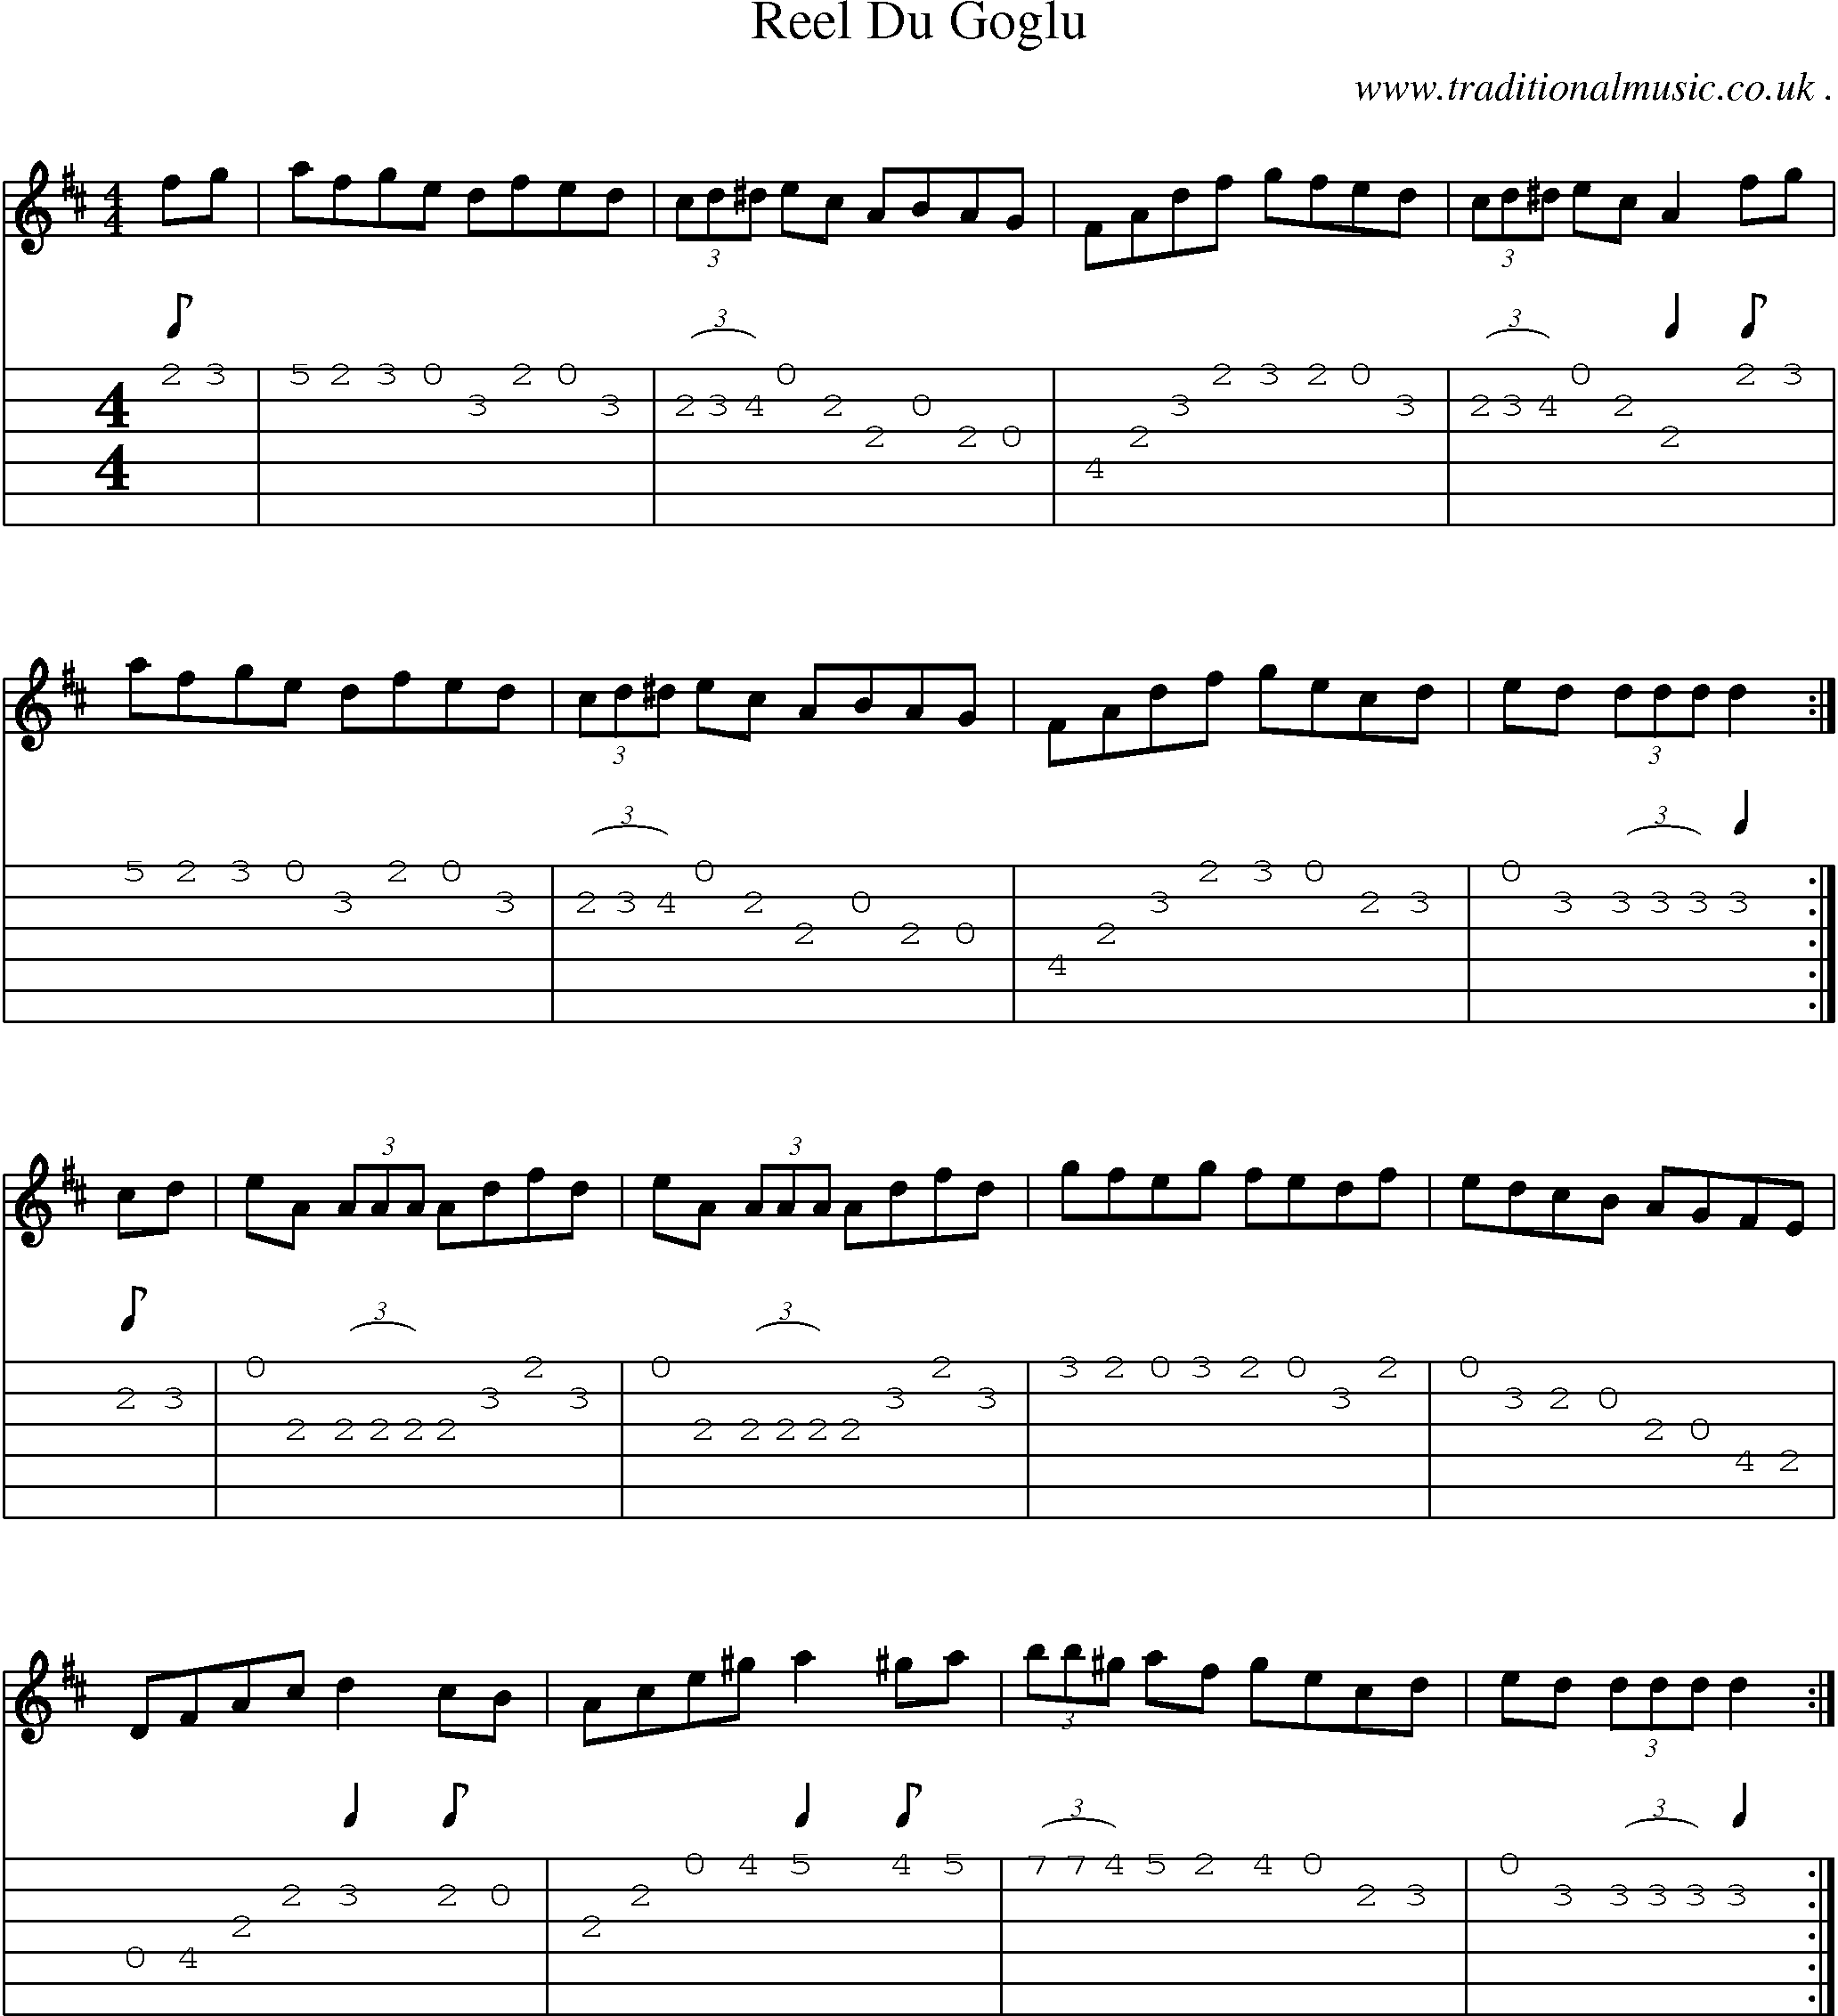 Sheet-Music and Guitar Tabs for Reel Du Goglu